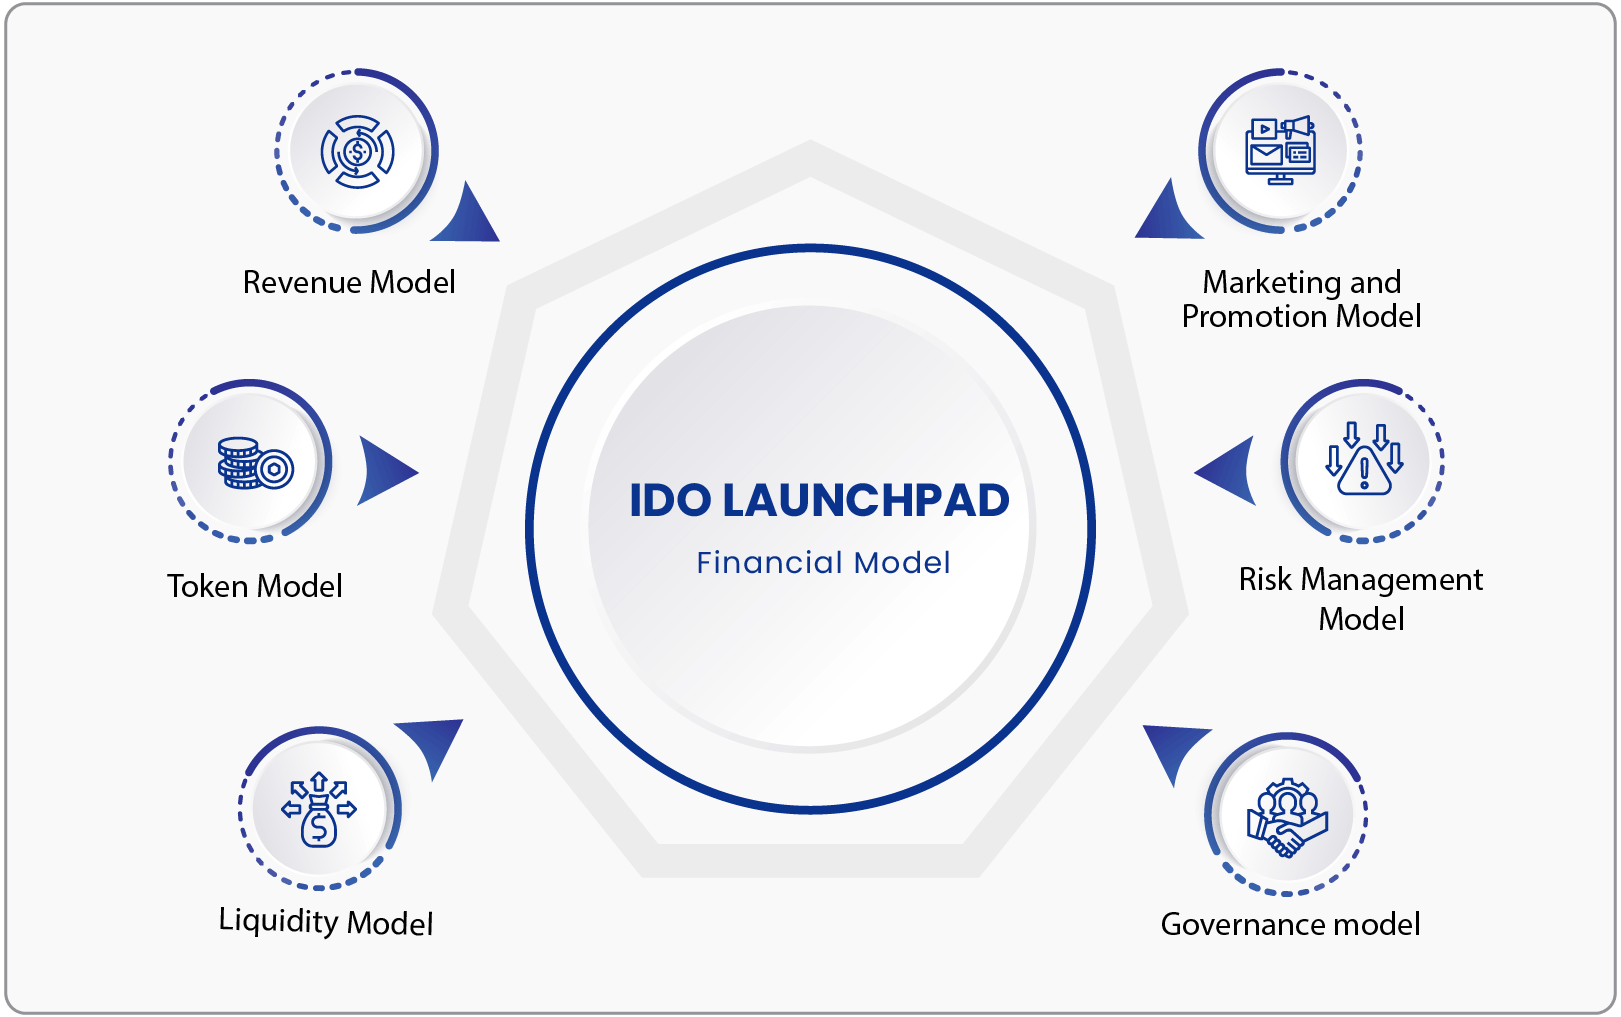 Components of the Financial Model of an IDO Launchpad